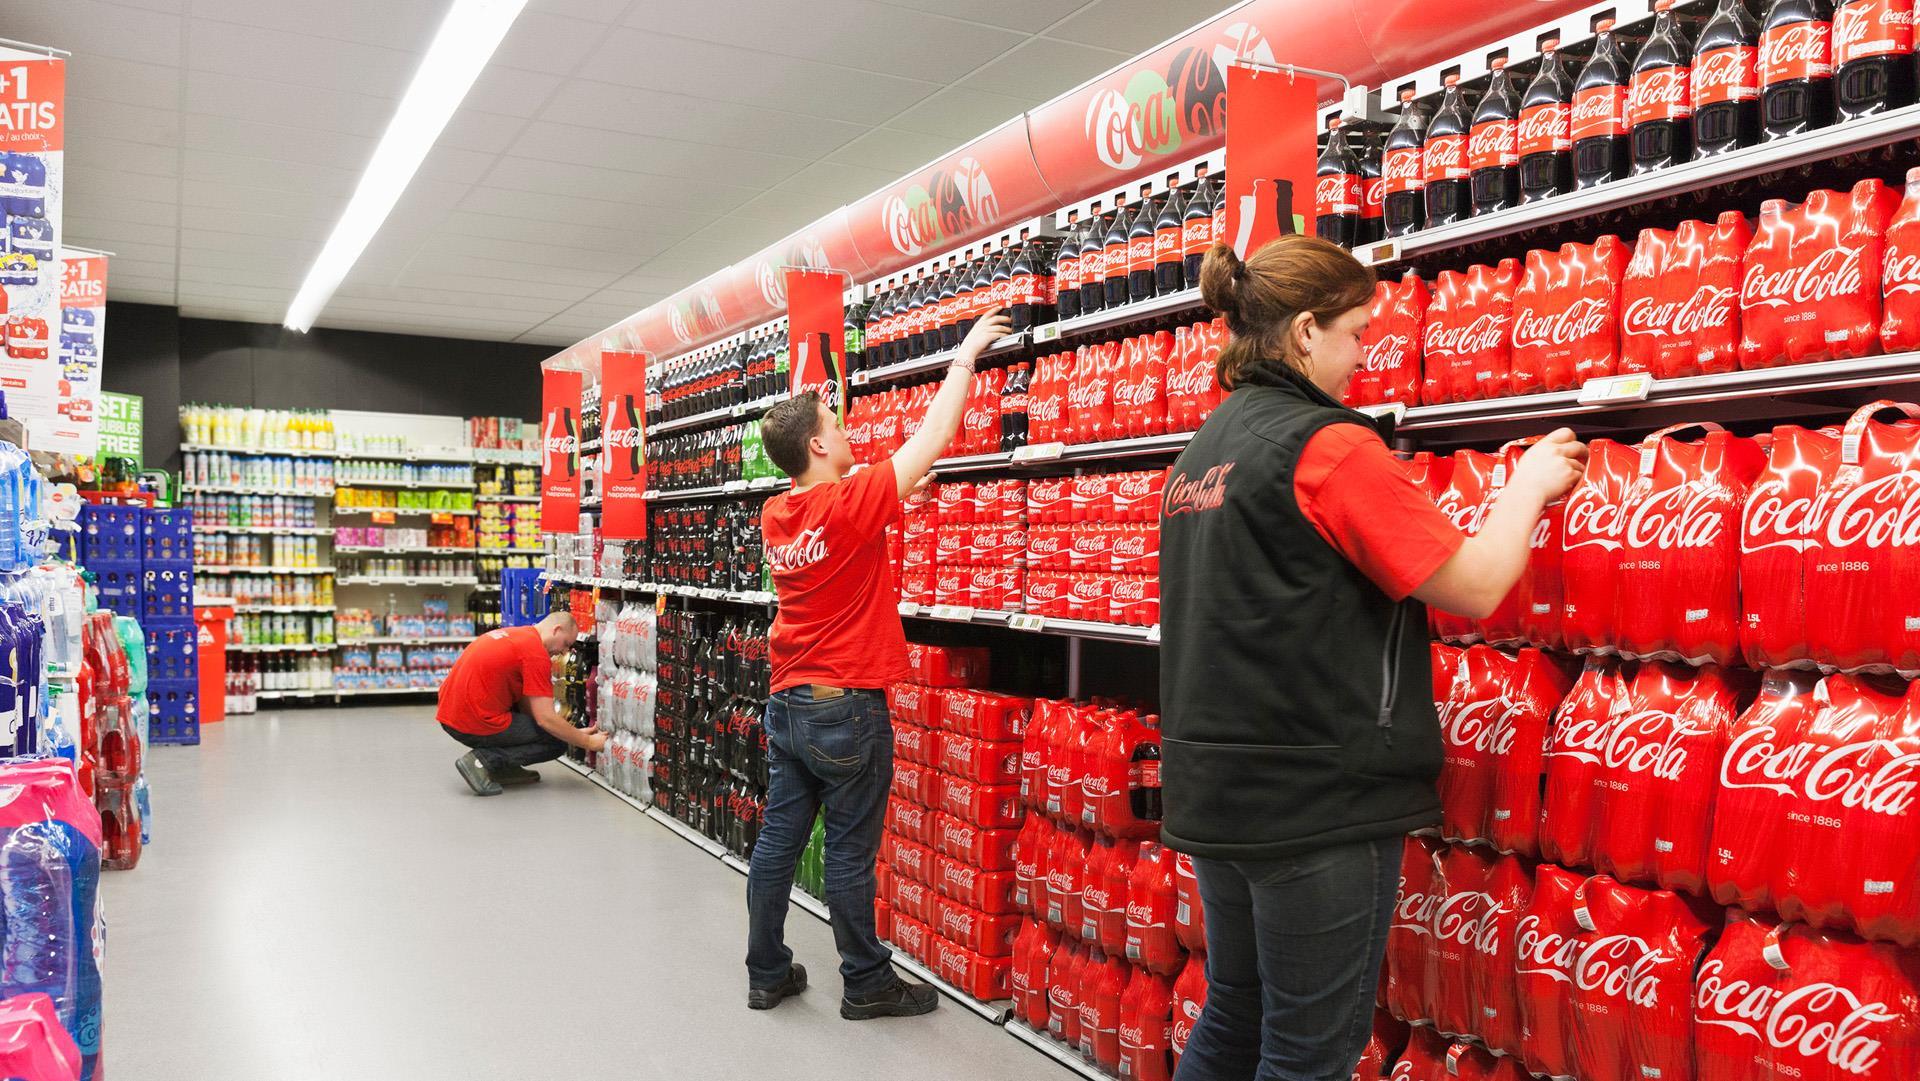 Coke focuses deals on front of store - and offers bigger savings | News